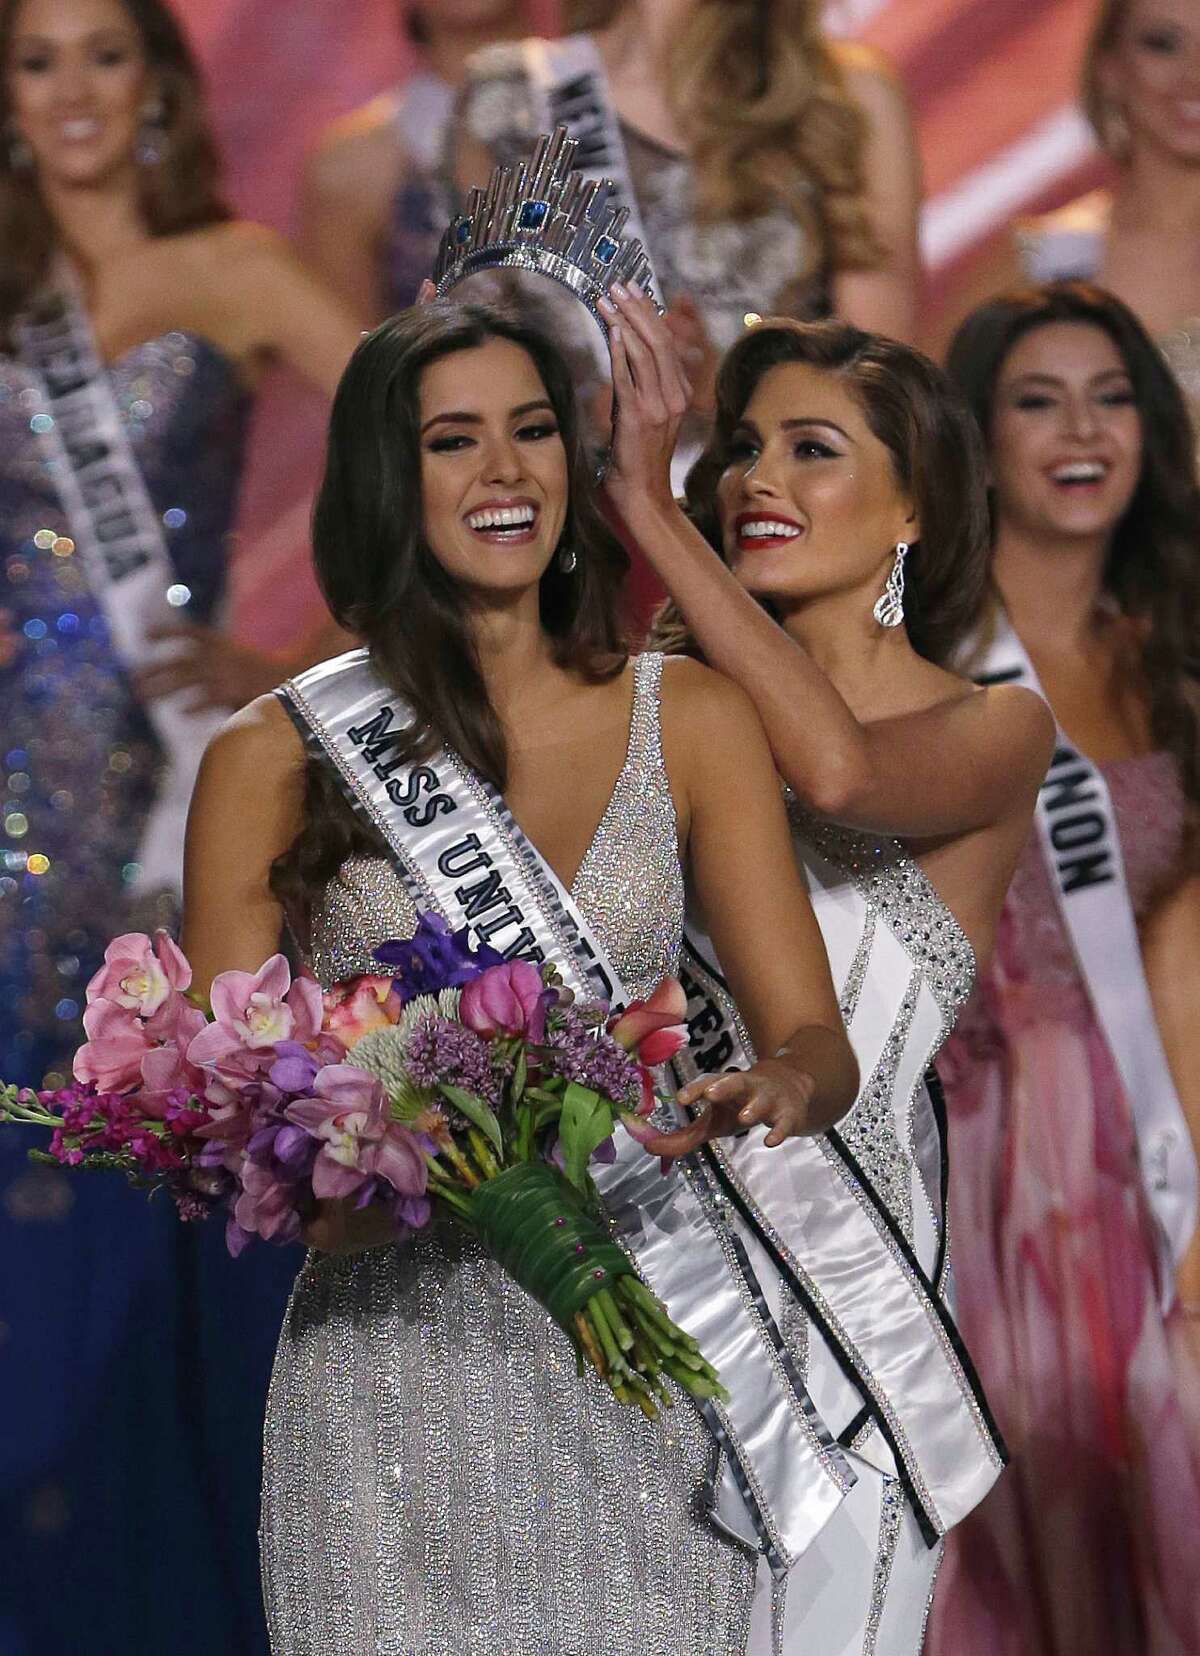 Reigning Miss Universe Gabriela Isler, right, crowns the new Miss Universe, Paulina Vega of Colombia, left, during the Miss Universe pageant in Miami, Sunday, Jan. 25, 2015.